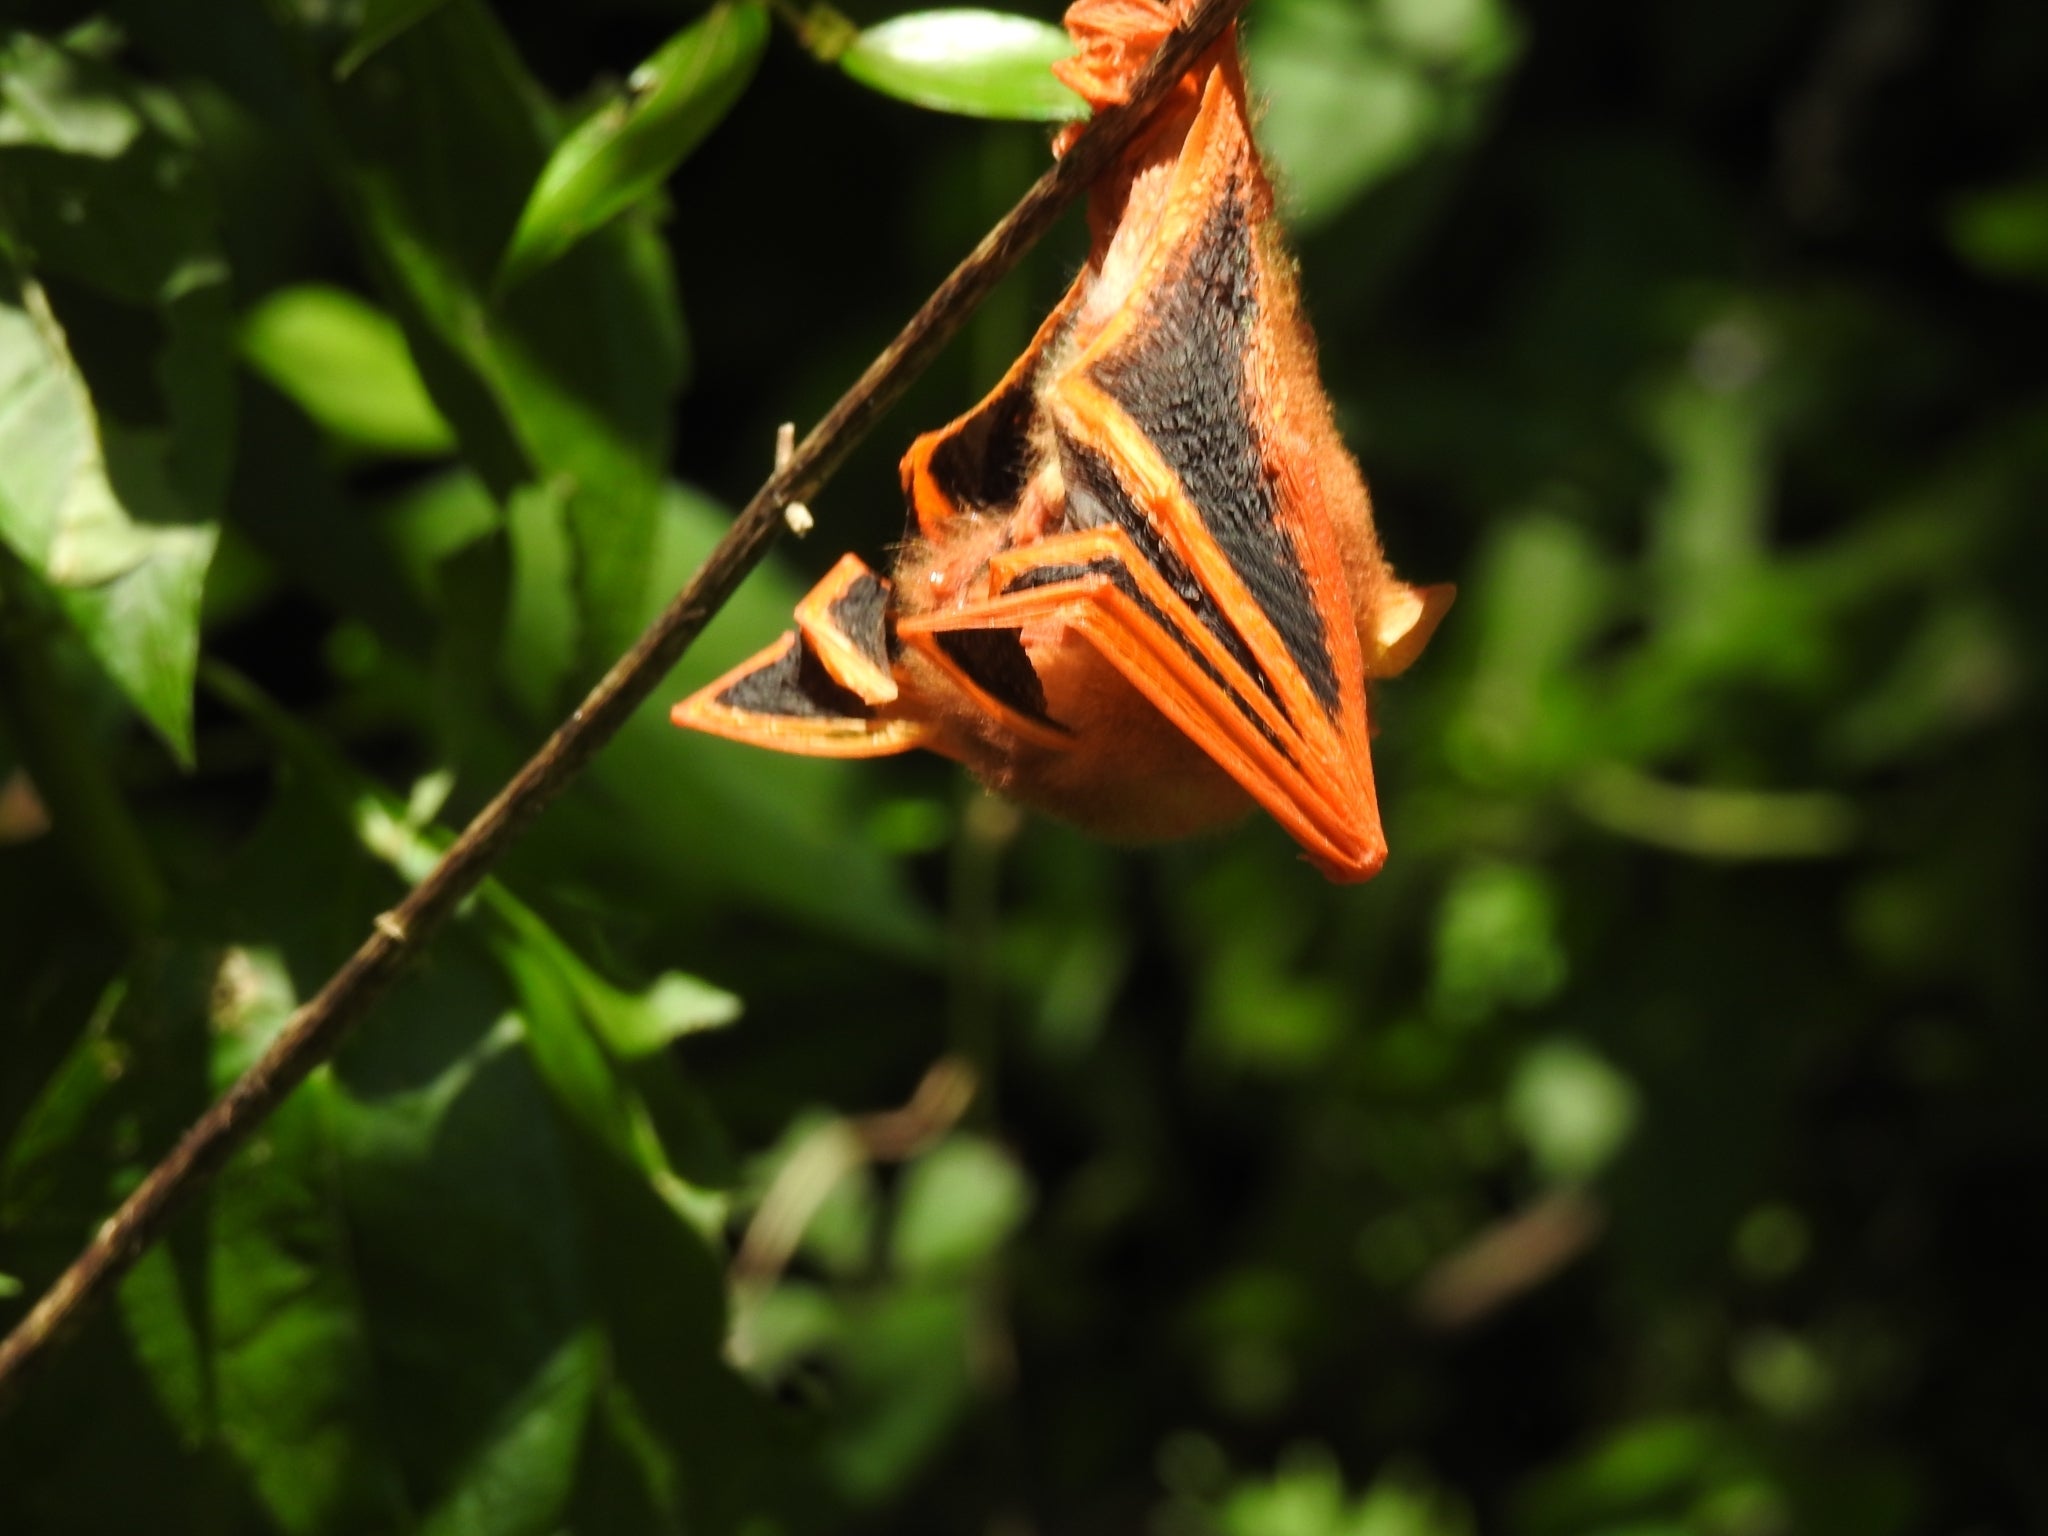 Kerivoula picta, a bat with orange and black coloring, hangs wings folded on a green leaf